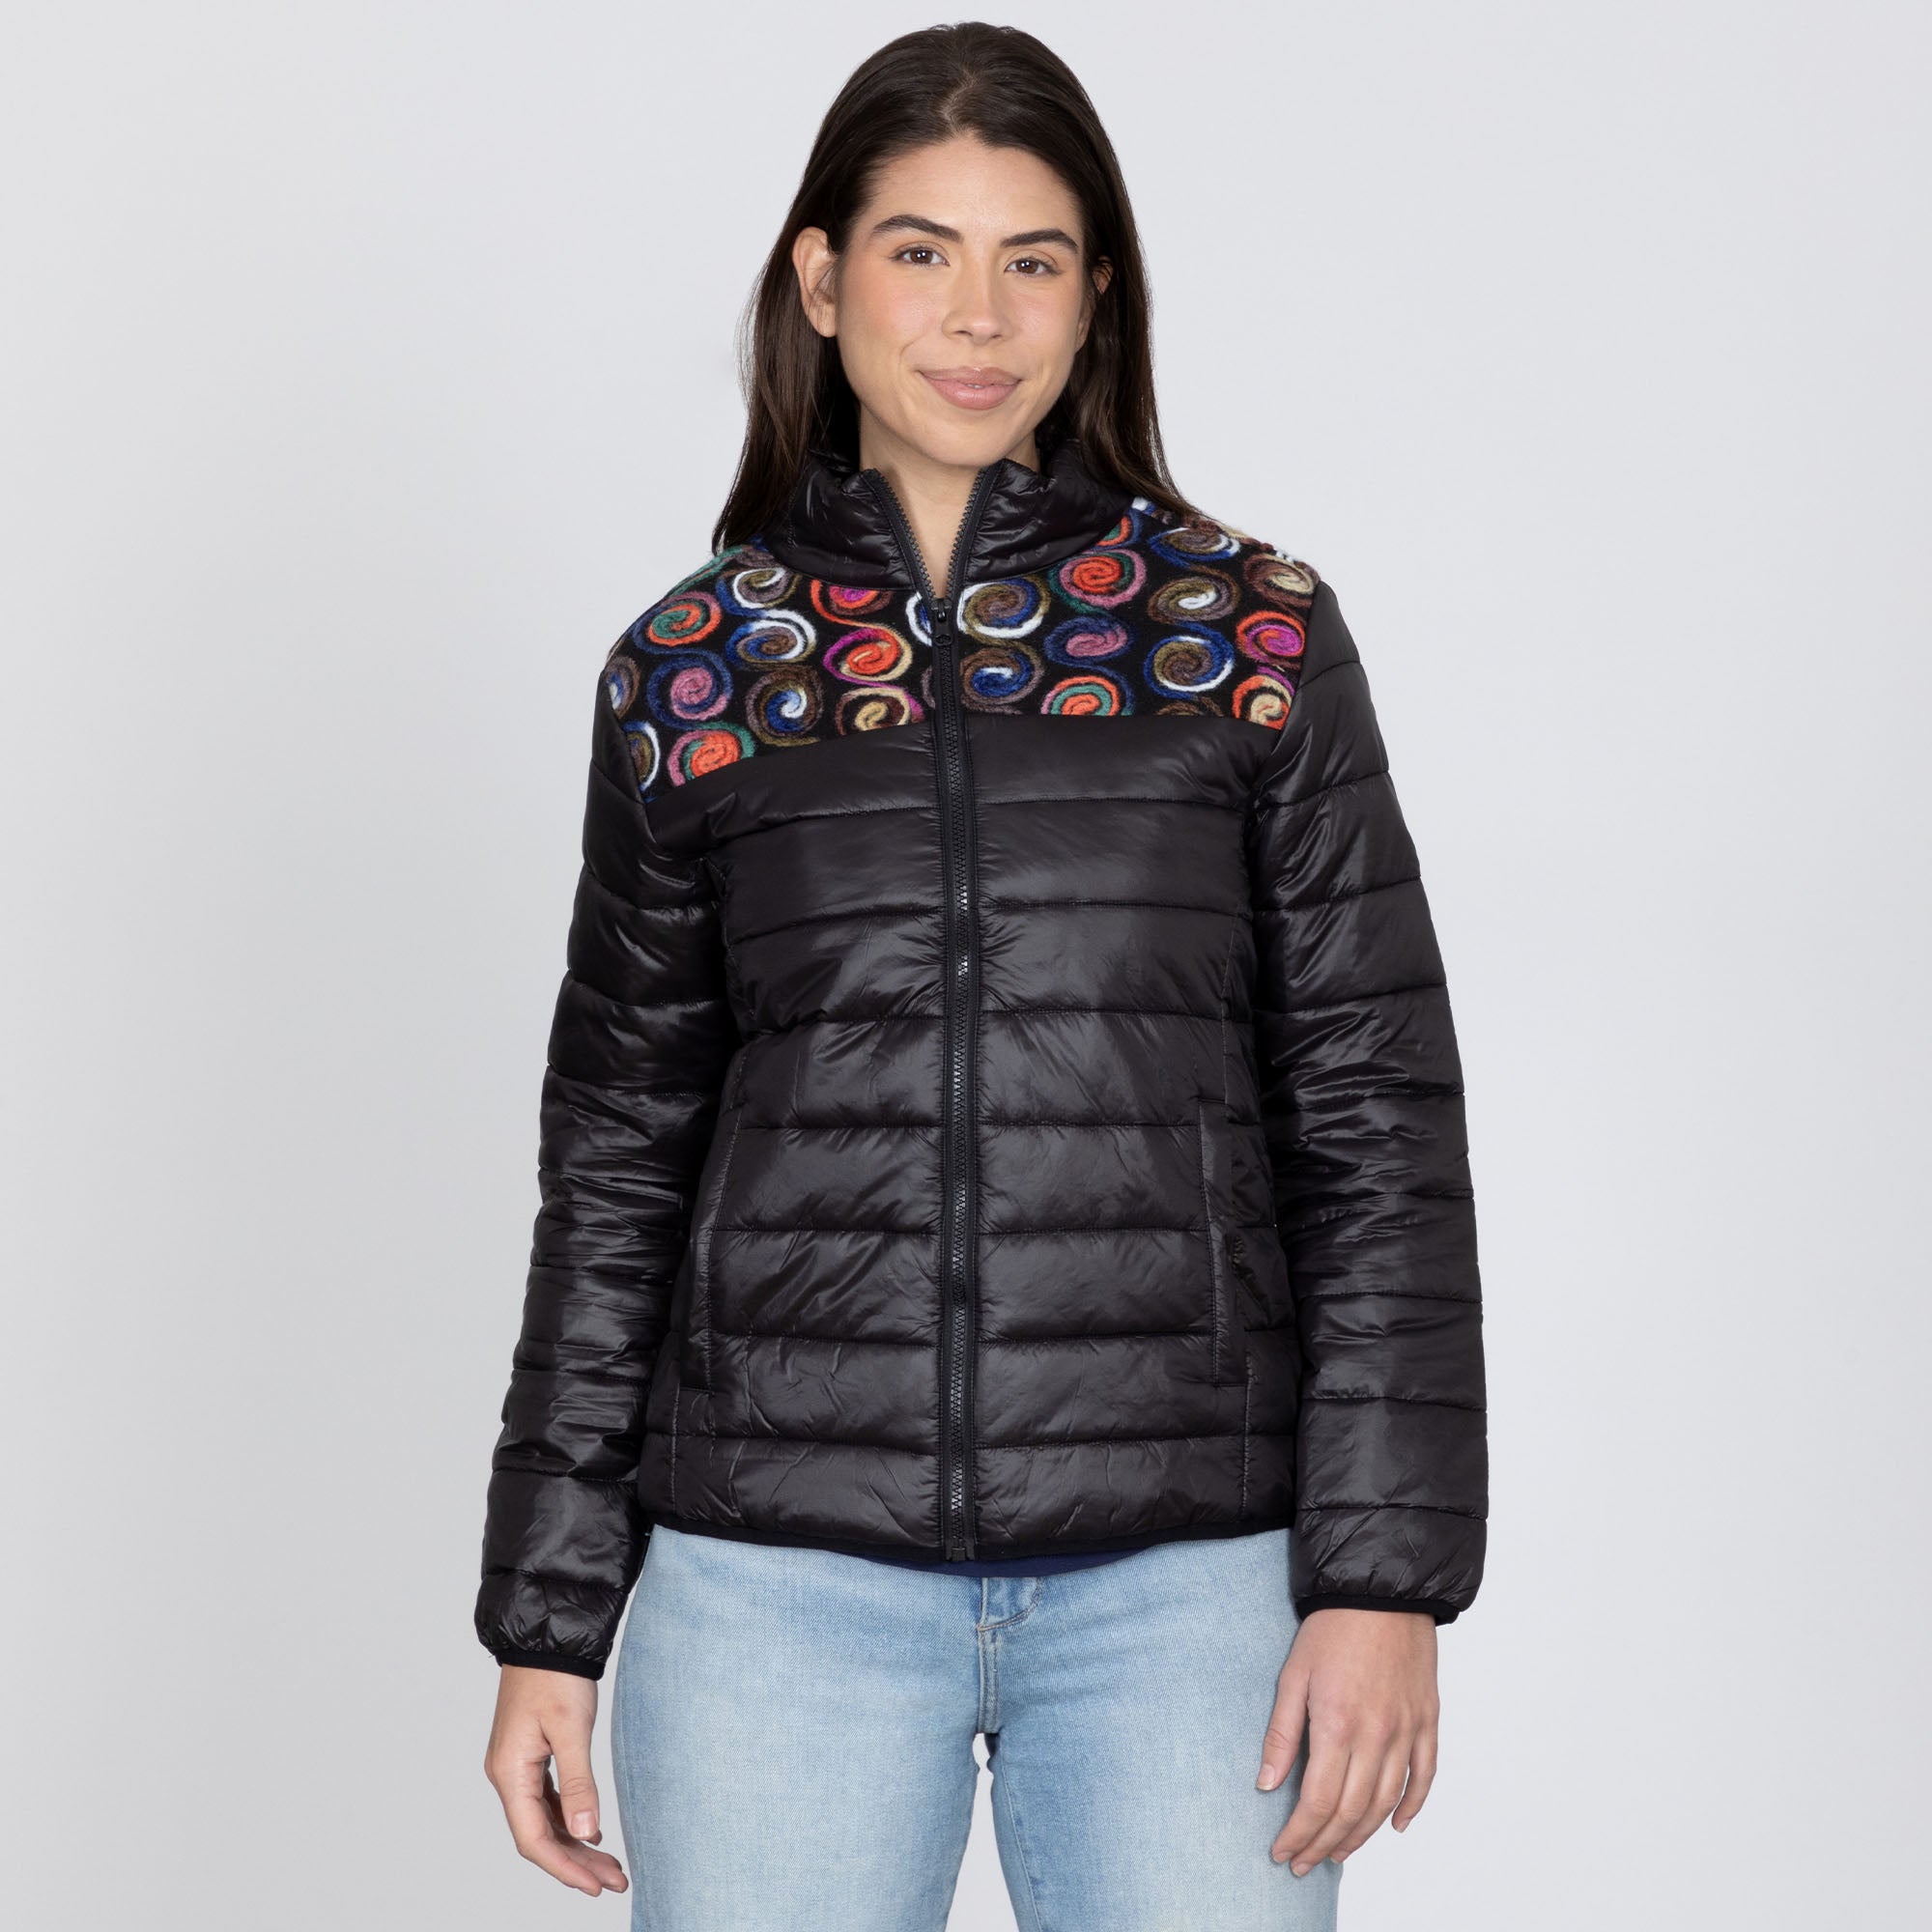 Mixed Fabric Embroidery Insulated Jacket - L